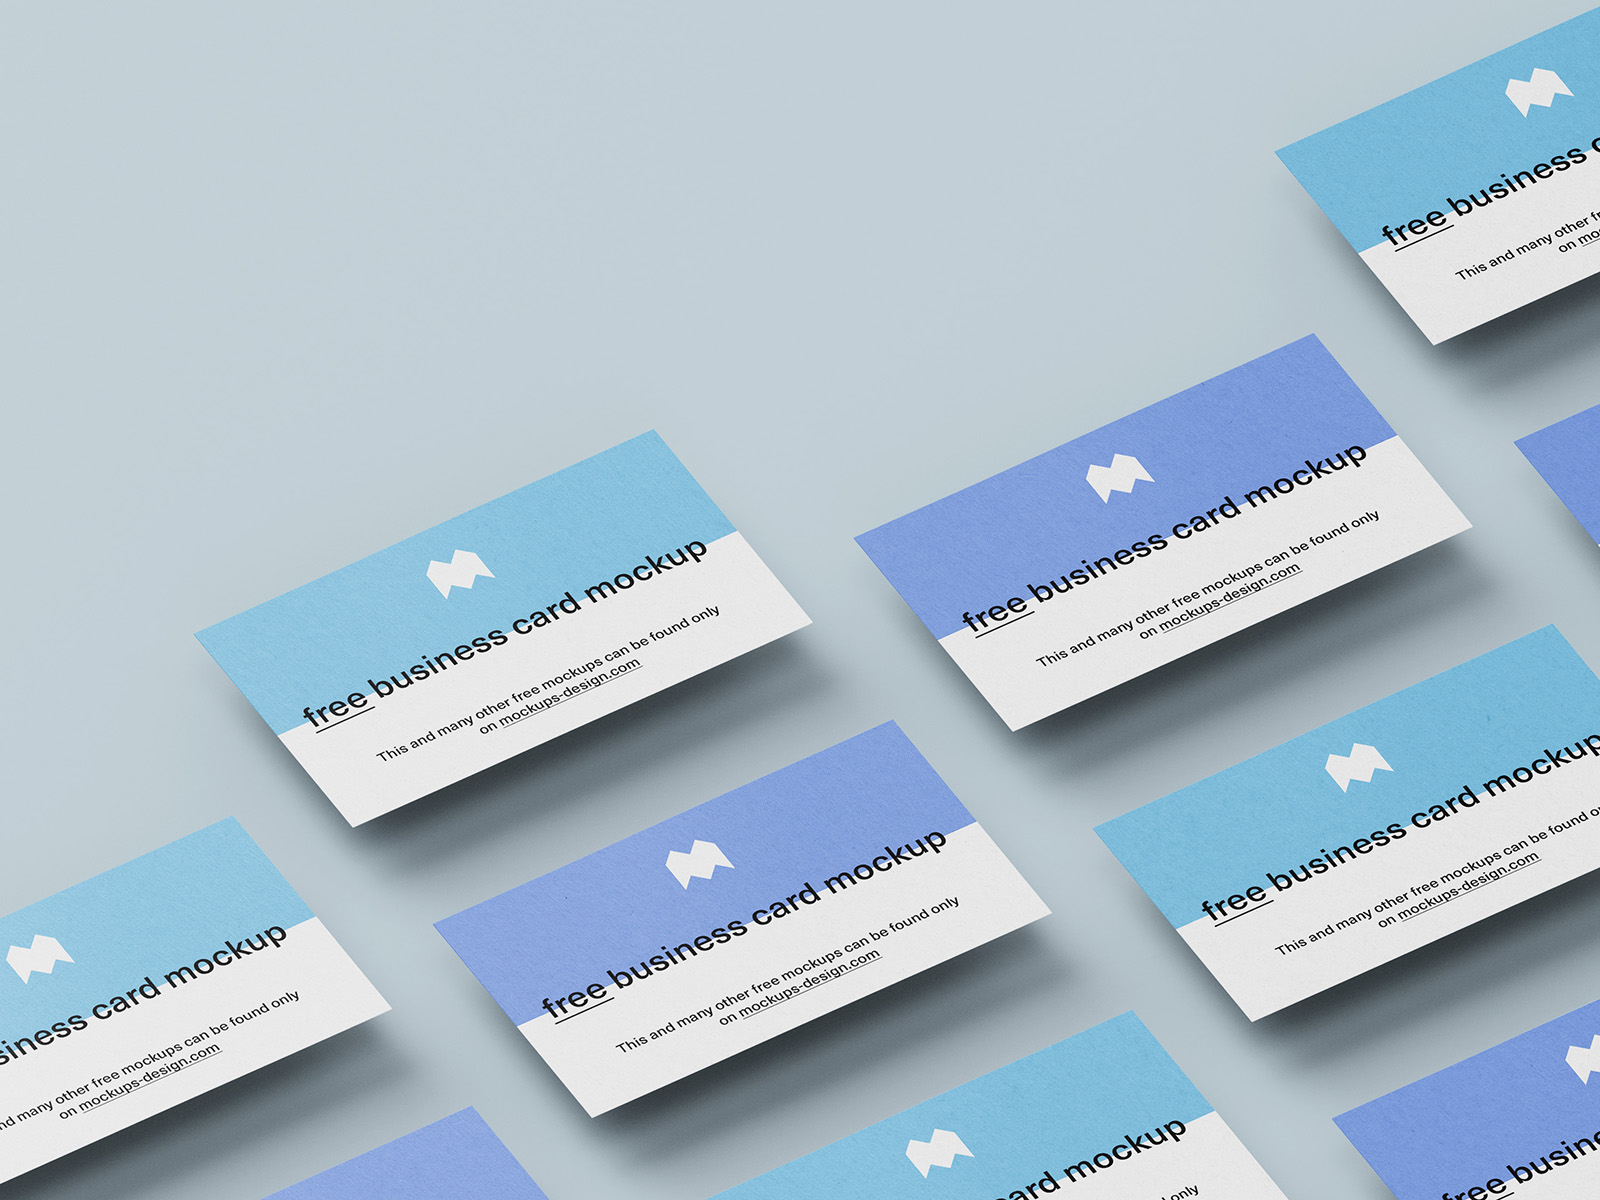 Free business cards mockup